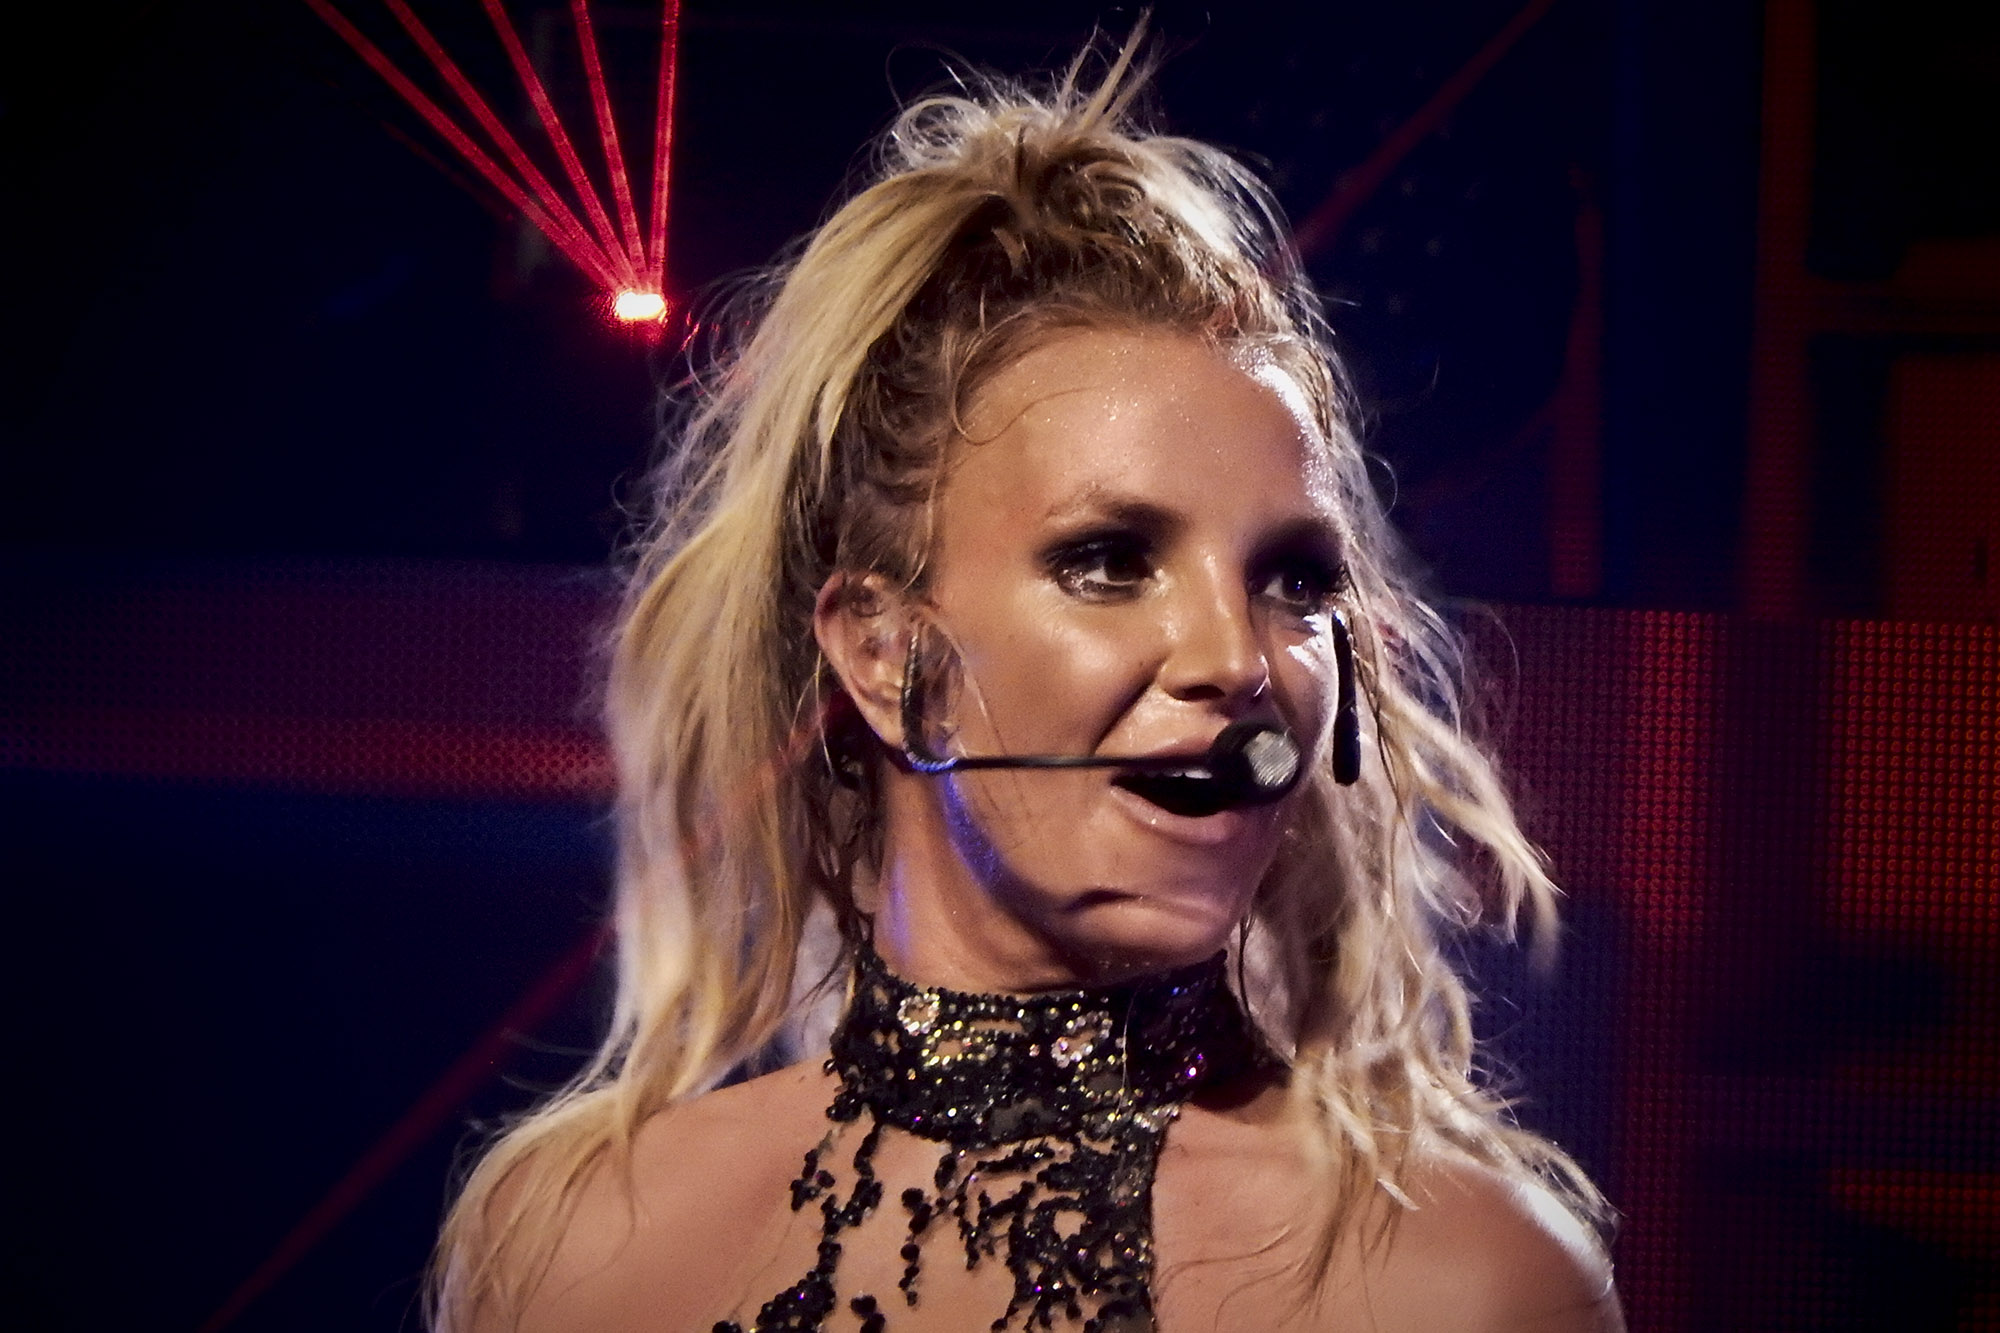 Brittany Spears headshot of her on stage with microphone